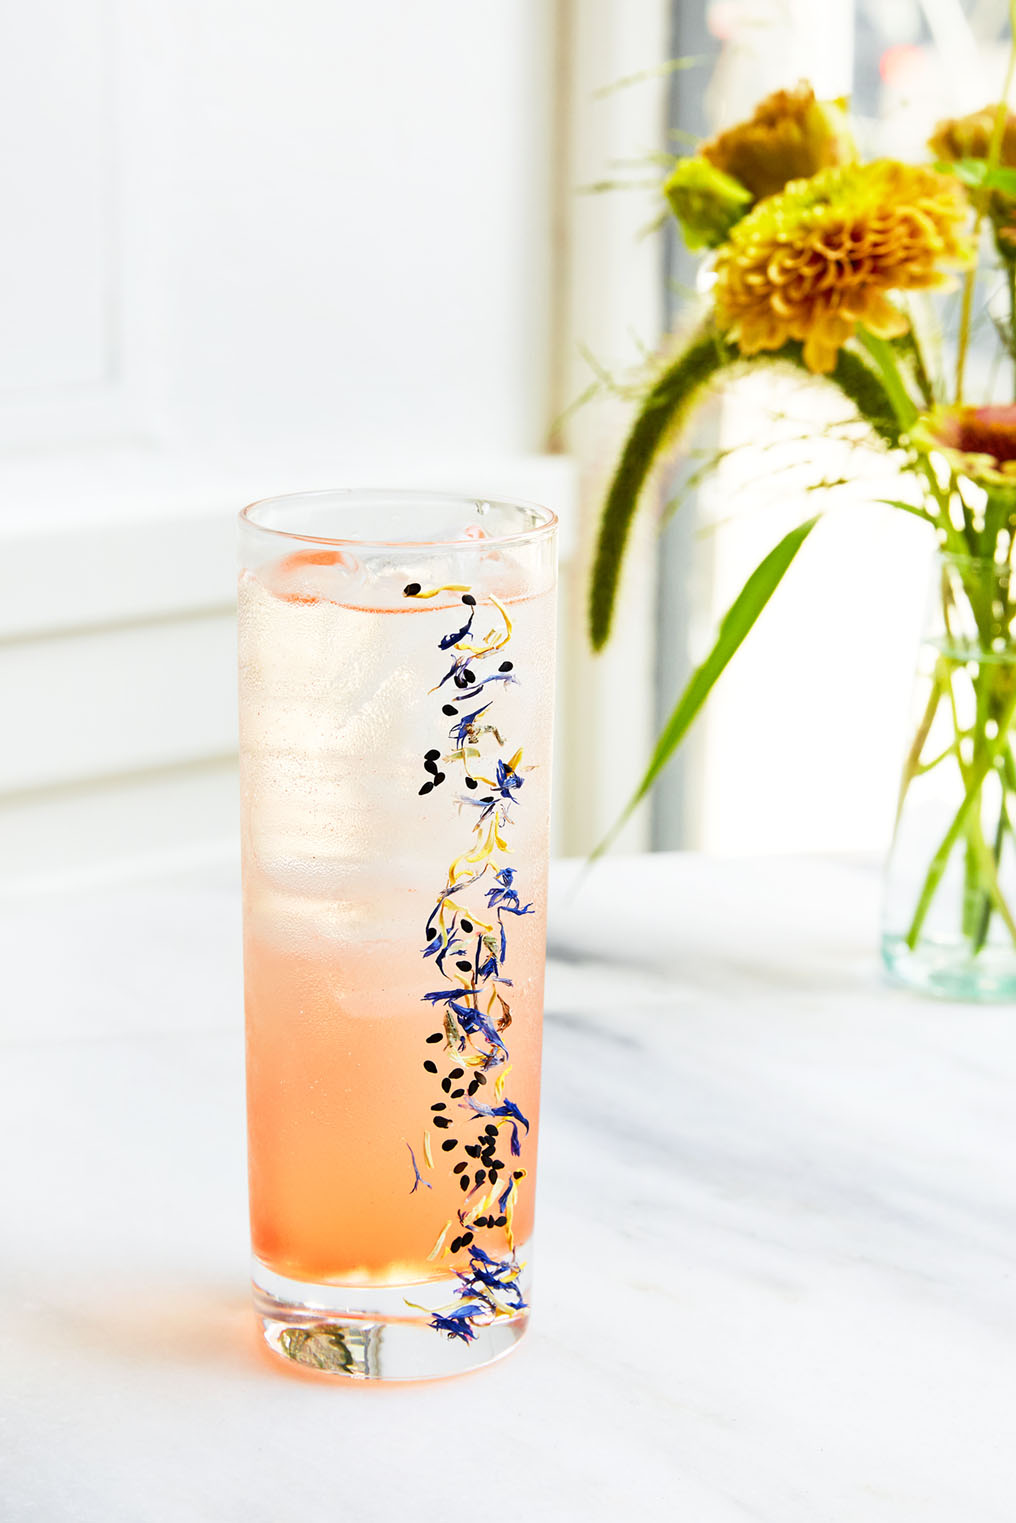 botanical-infused cocktail at Il Florista